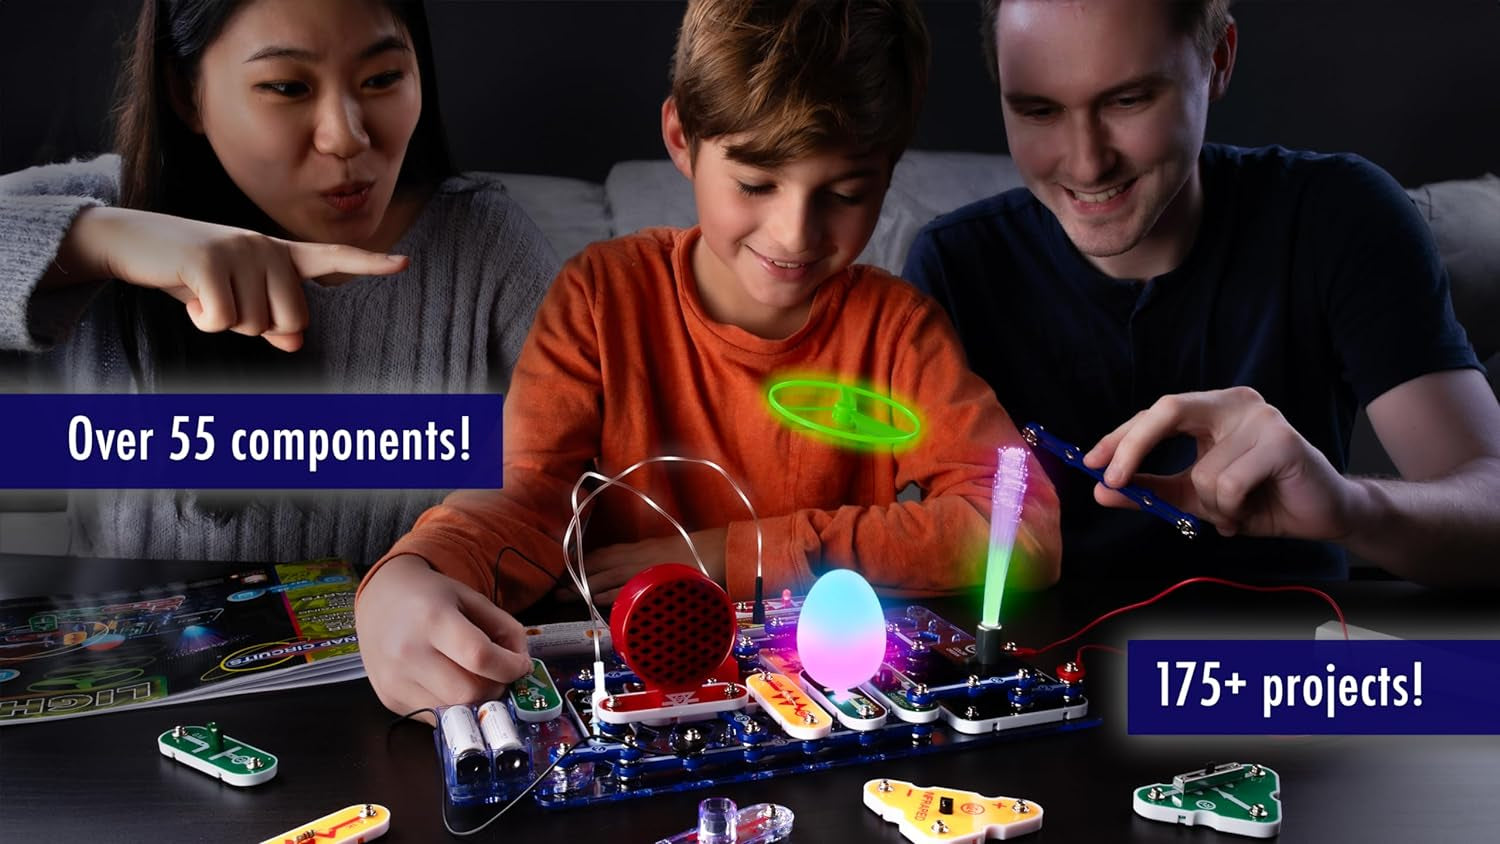 Snap Circuits LIGHT Electronics Exploration Kit | over 175 Exciting STEM Projects | Full Color Project Manual | 55+ Snap Circuits Parts | STEM Educational Toys for Kids 8+,Multi